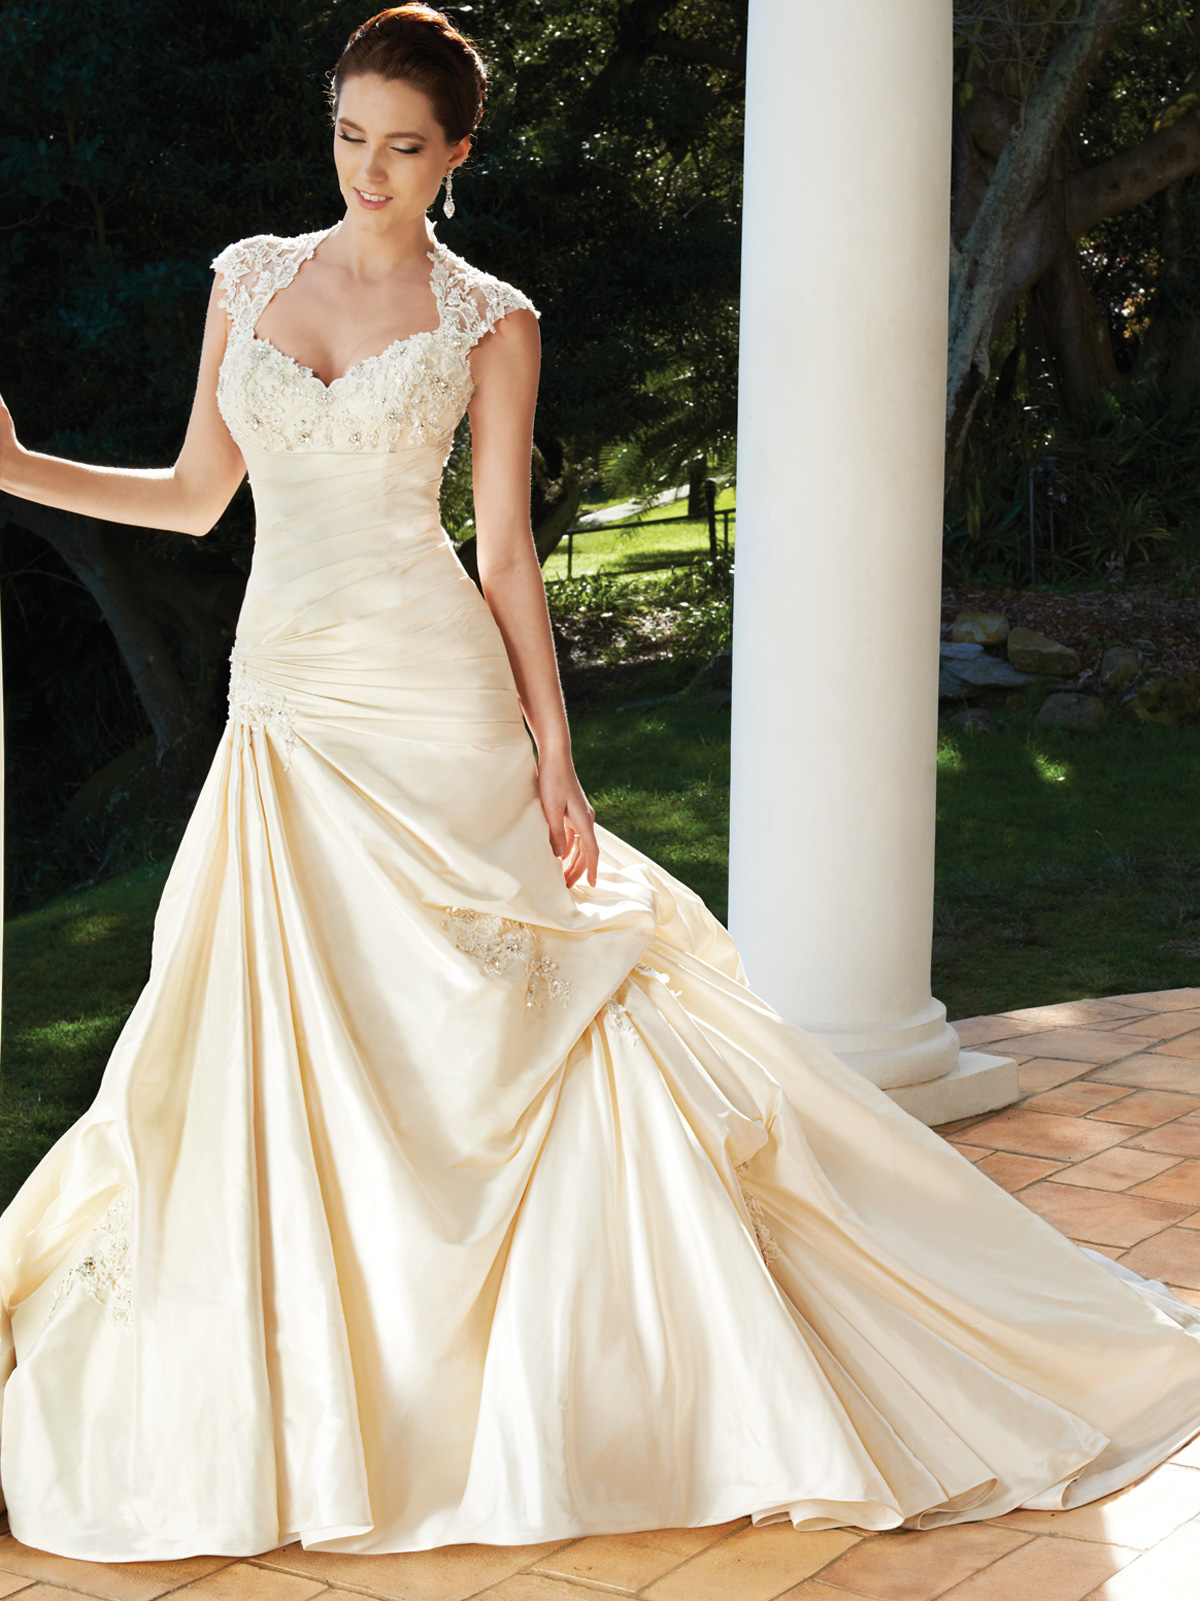 Lace cap sleeve wedding gown.